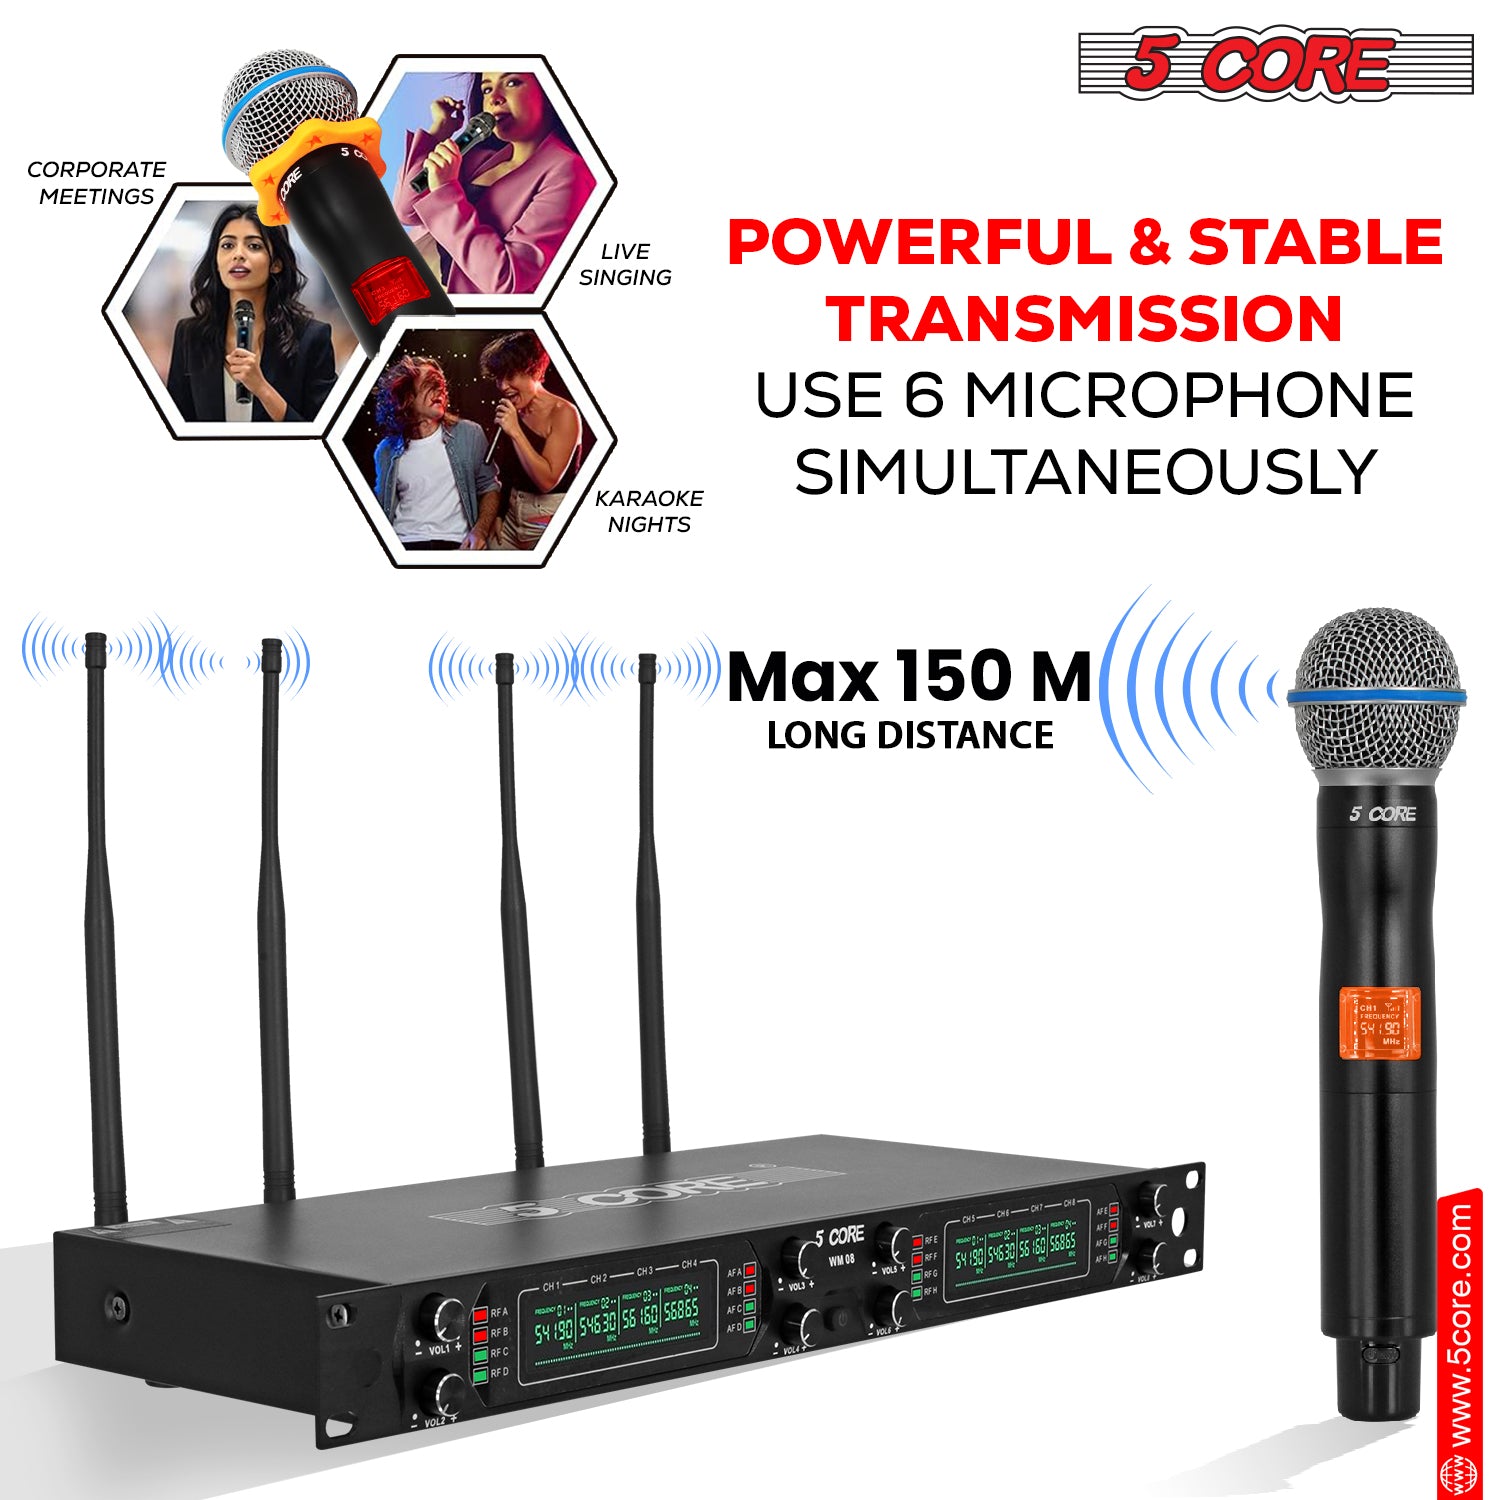 Crisp and Clear Audio Reproduction: Dynamic Cordless Mics Offer Exceptional Sound Quality for Speeches, Performances, and Announcements.